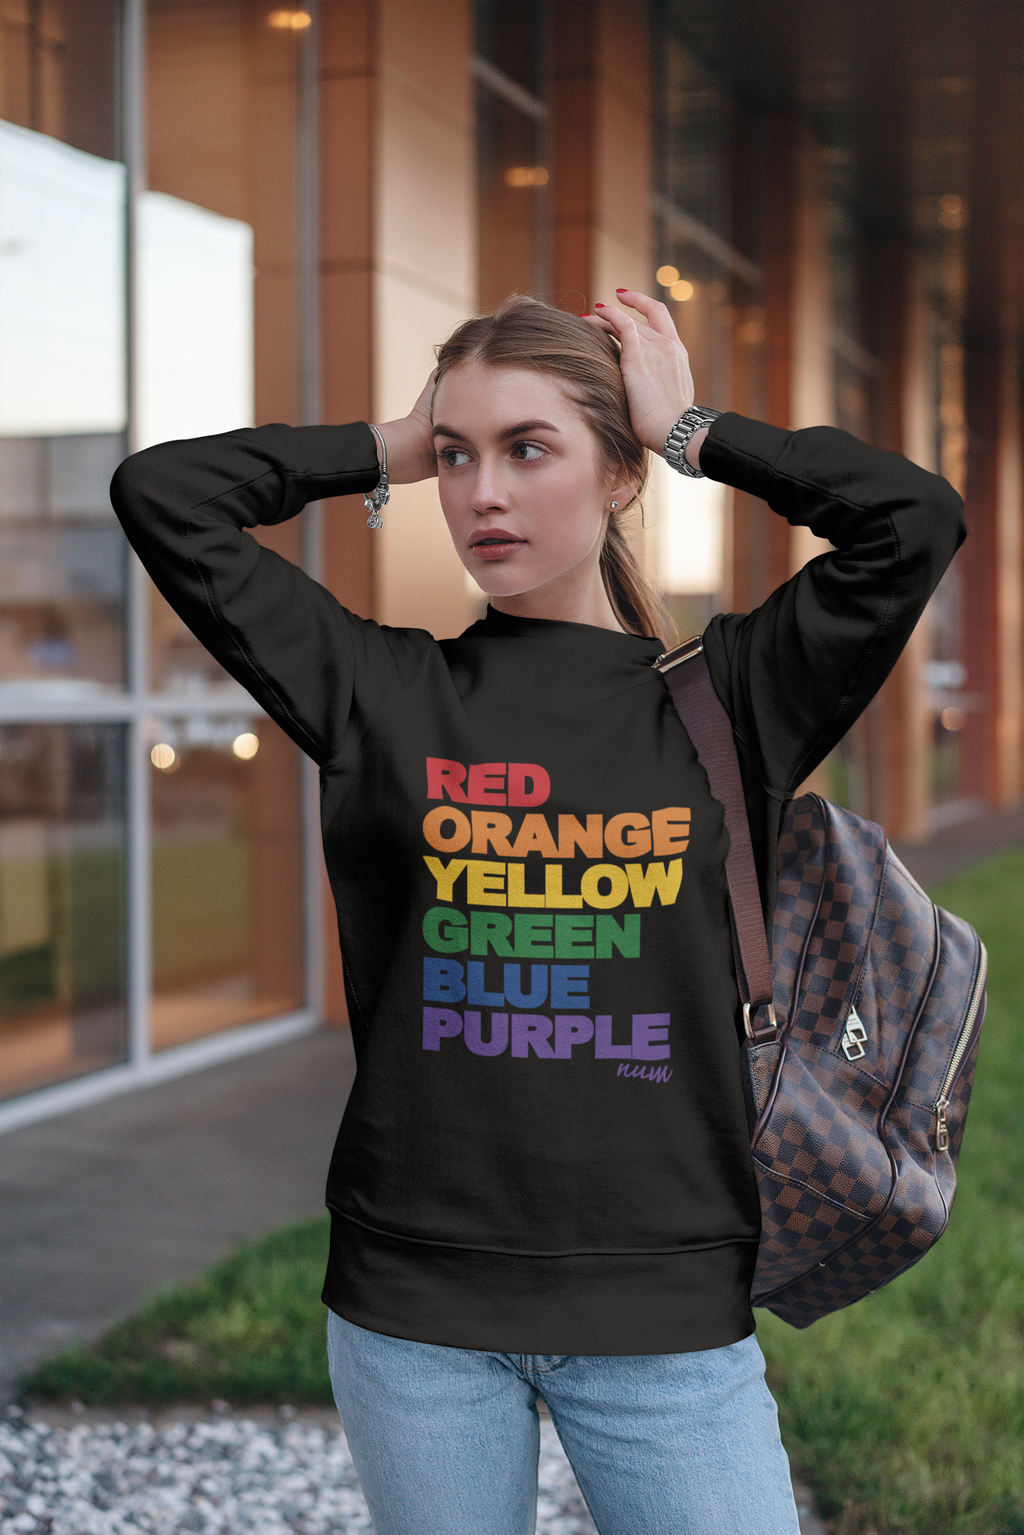 sweatshirt-mockup-of-a-woman-with-her-hands-on-her-head-2842-el1.png